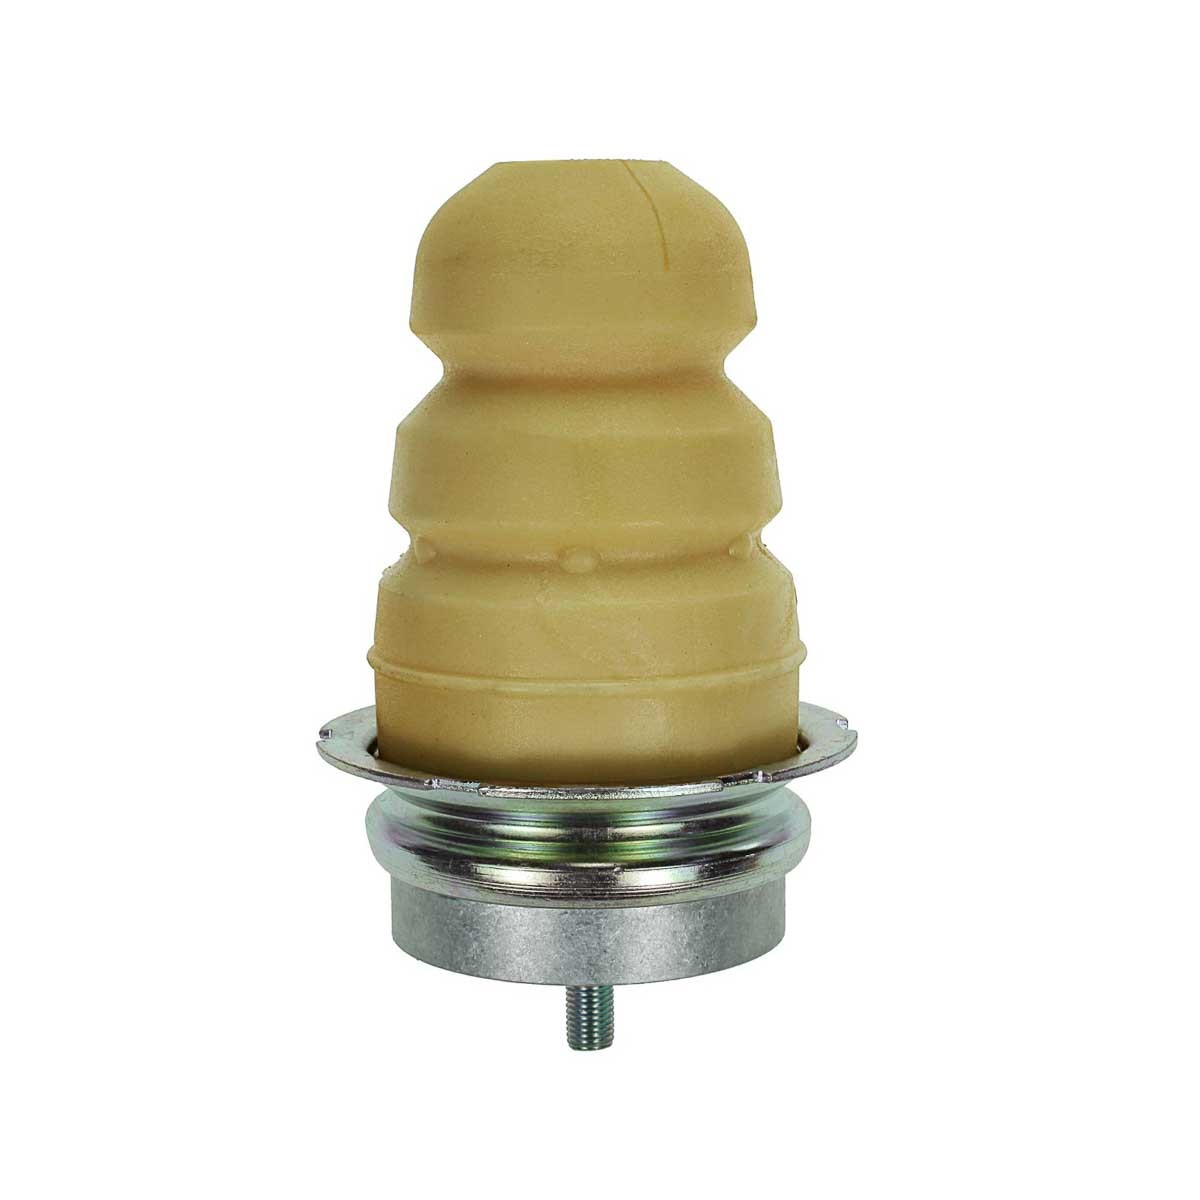 Fiat BRAVO Shock absorber dust cover and bump stops 8049499 MEYLE 214 742 0008 online buy